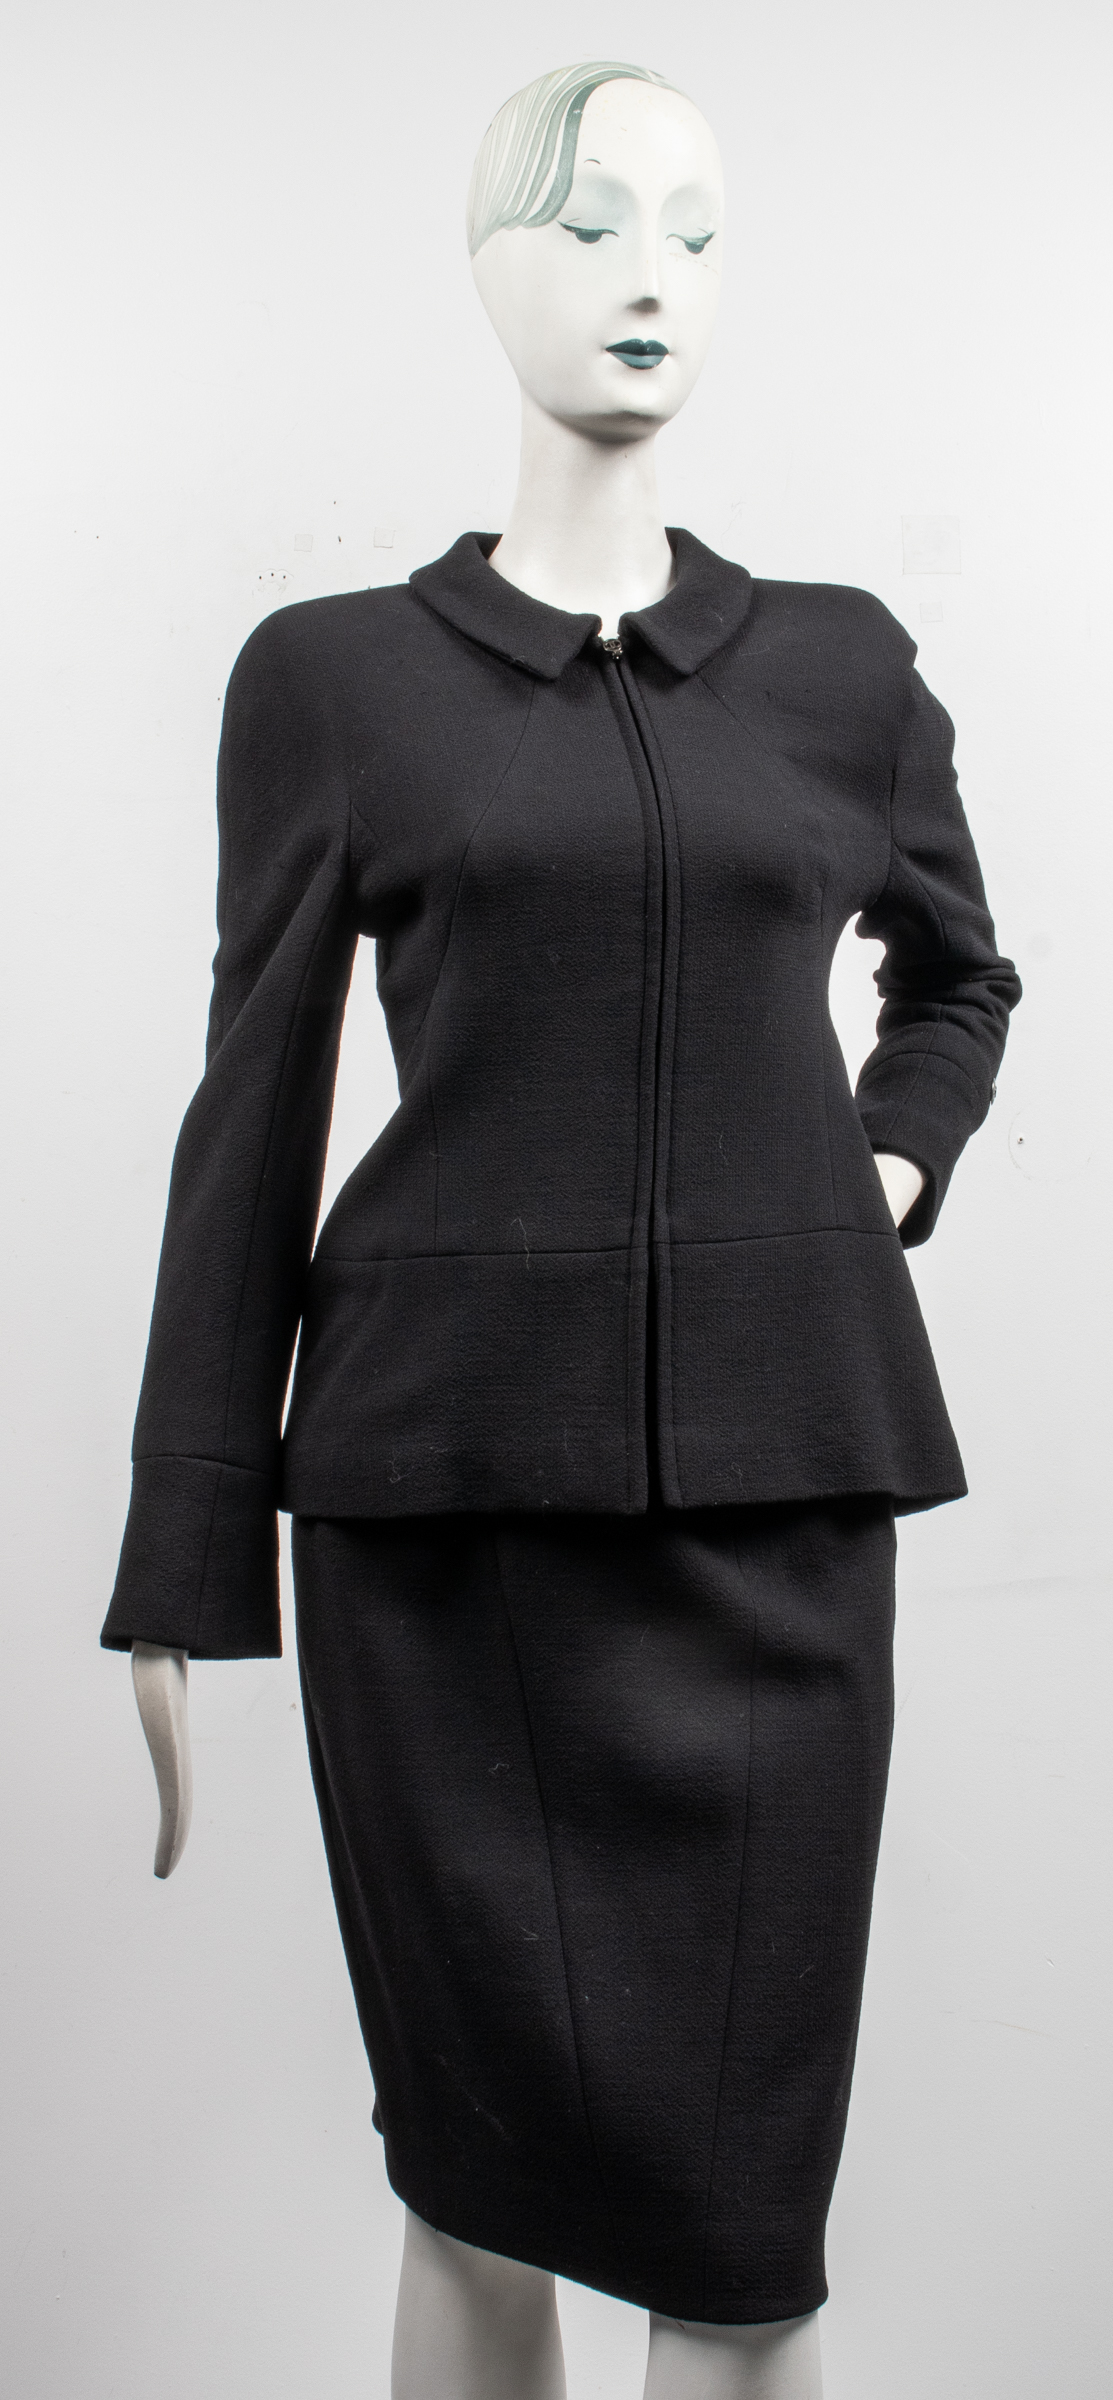 CHANEL BLACK WOOL SKIRT SUIT Chanel